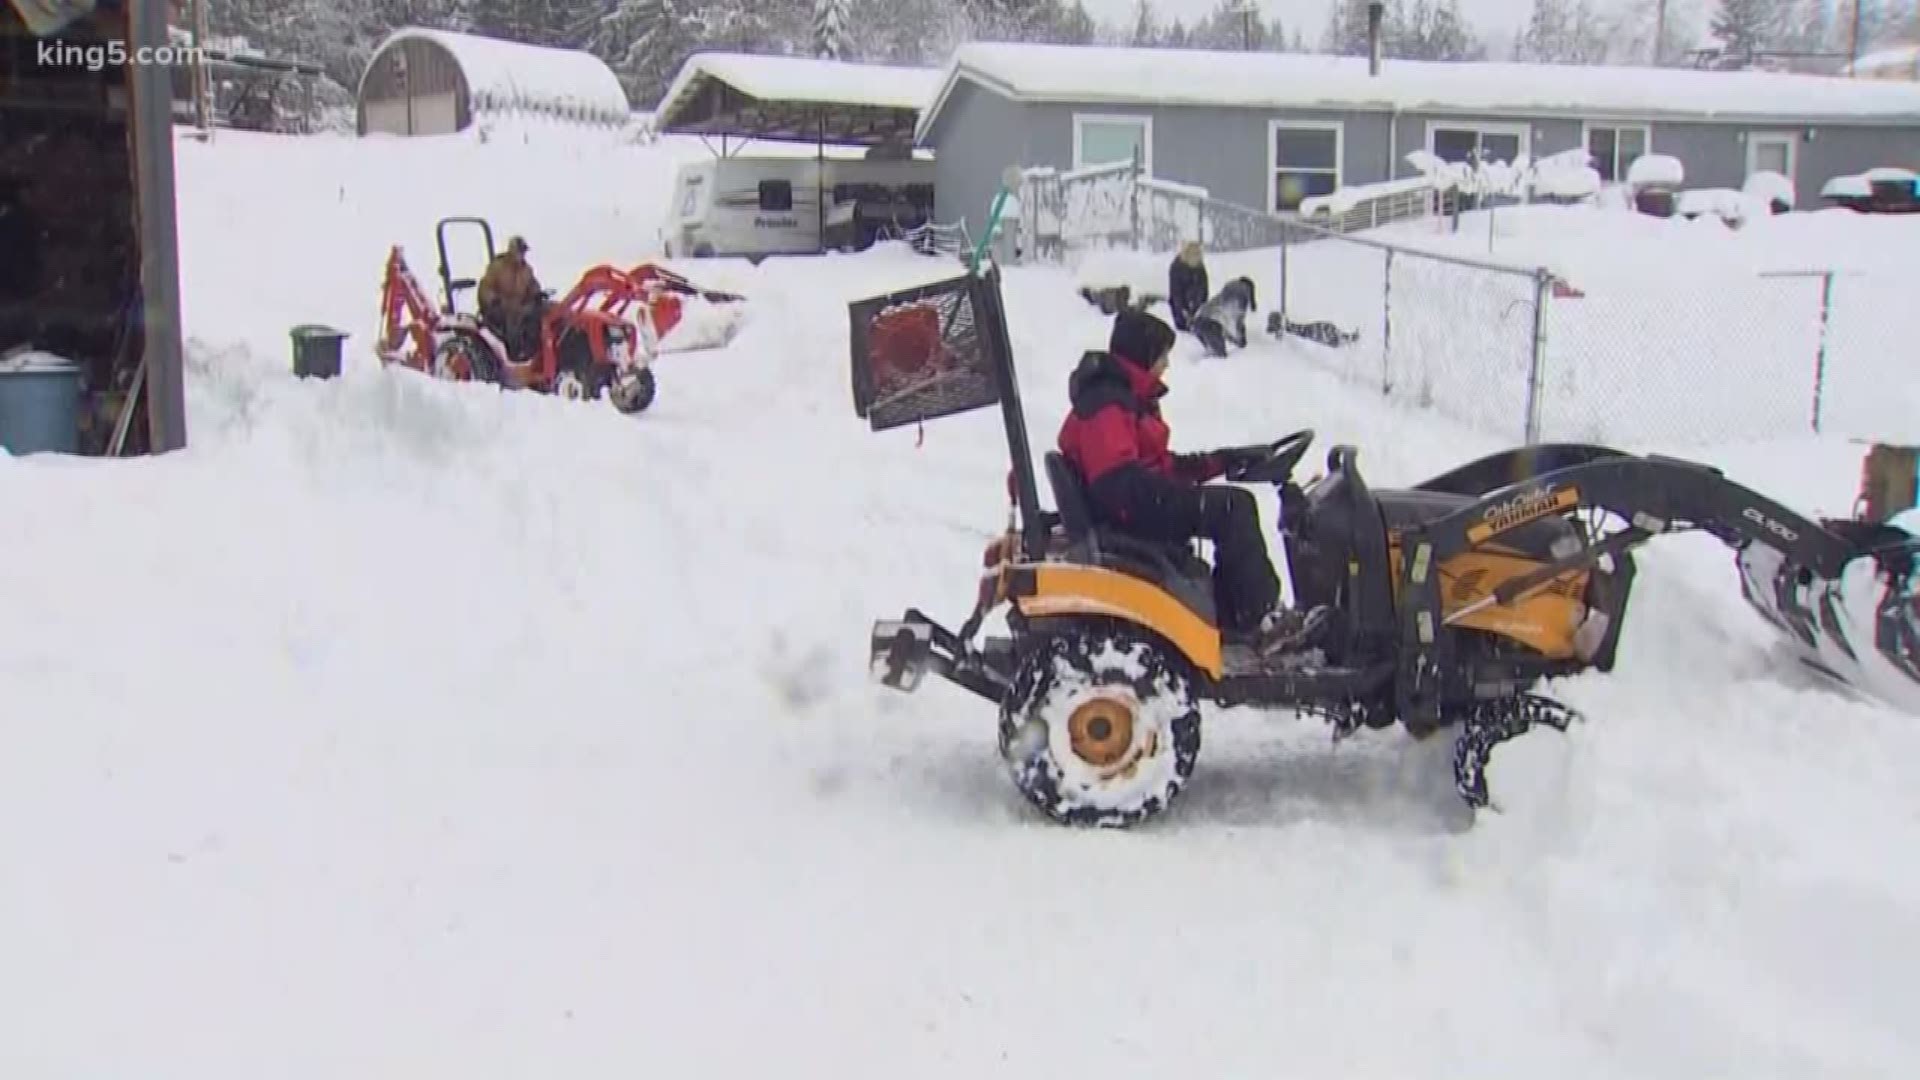 The area hardest hit by this storm is Sequim up on the Olympic Peninsula where people are digging out of an incredible amount of snow. KING 5's Eric Wilkinson reports.